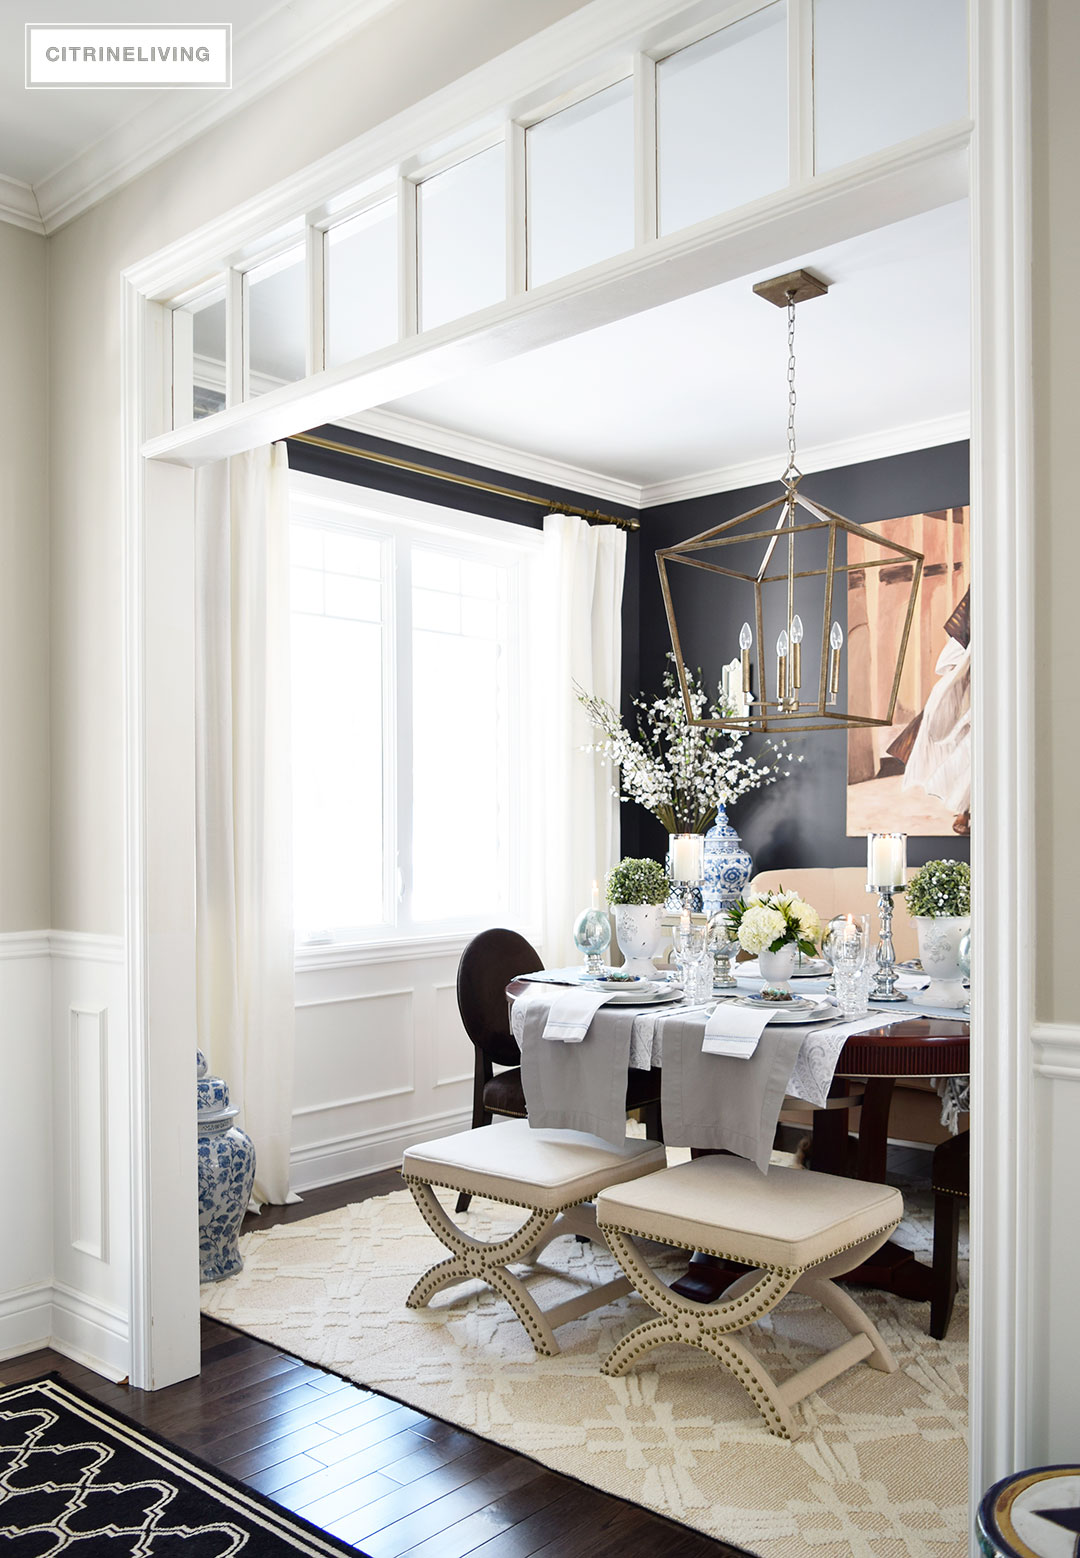 Dining room with elegant black wall color, Cracked Pepper Behr Paint, white wainscotting and transoms